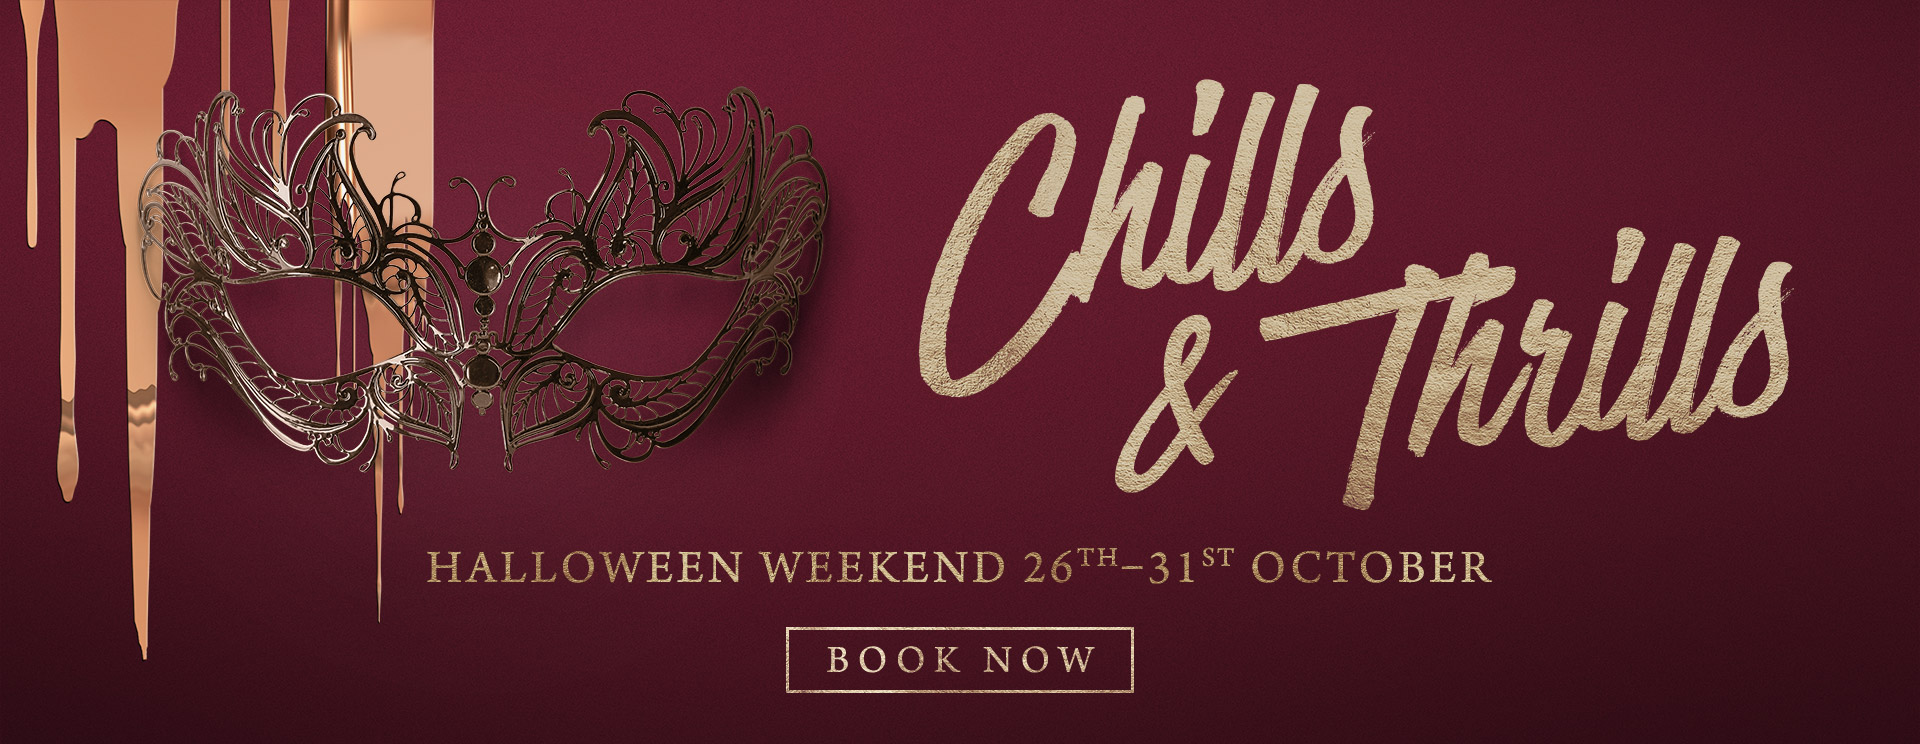 Chills & Thrills this Halloween at The Green Man